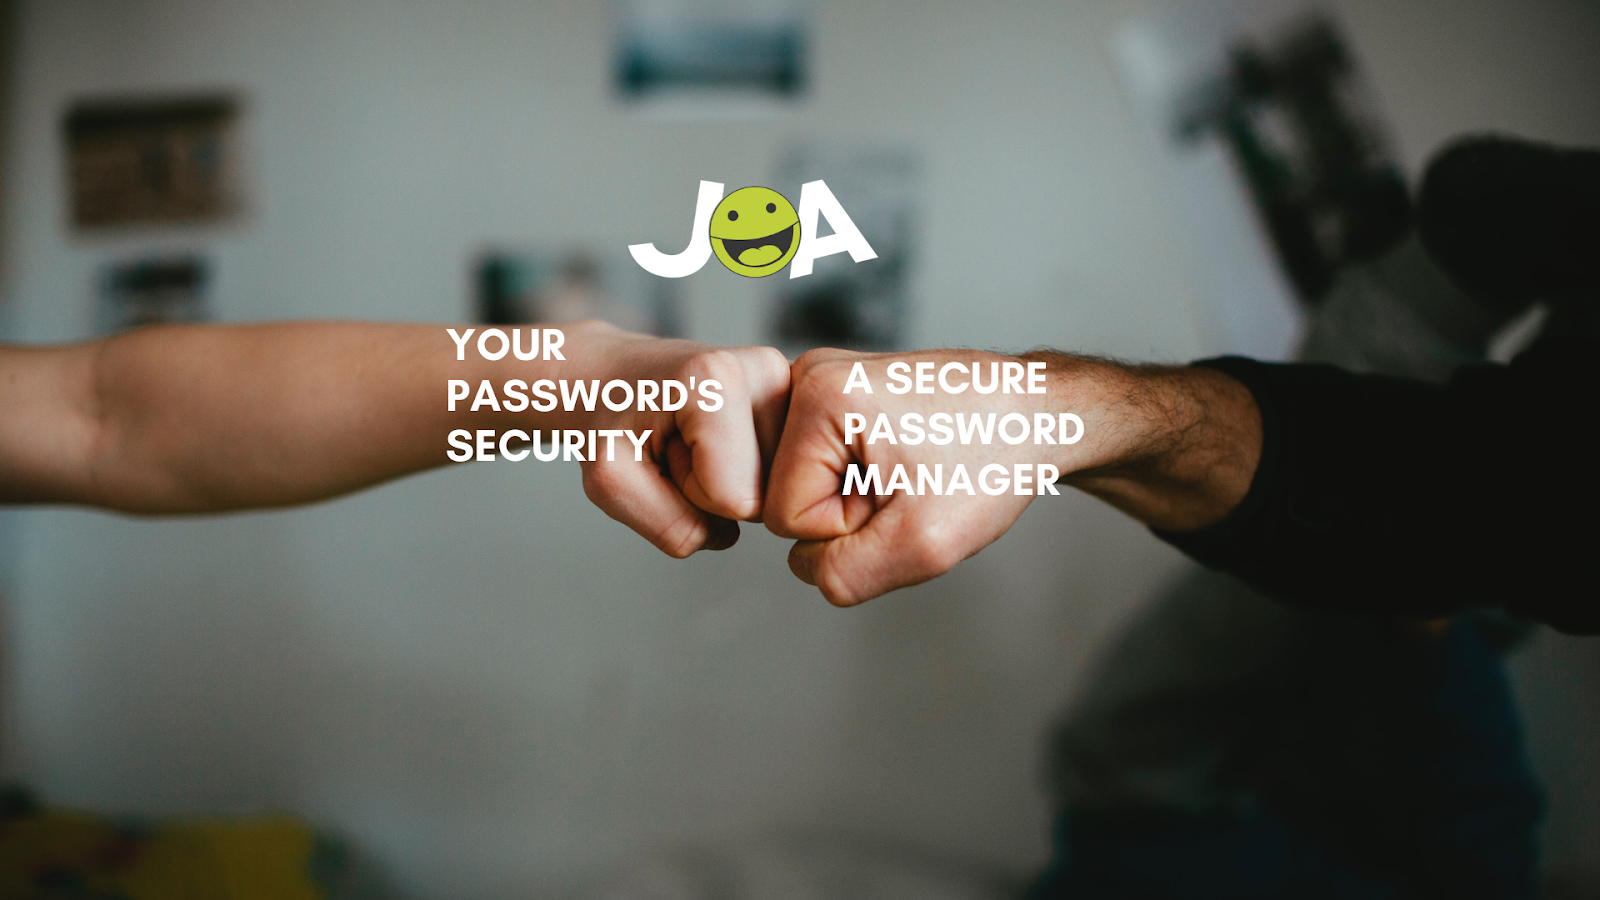 Use A Secure Password Manager